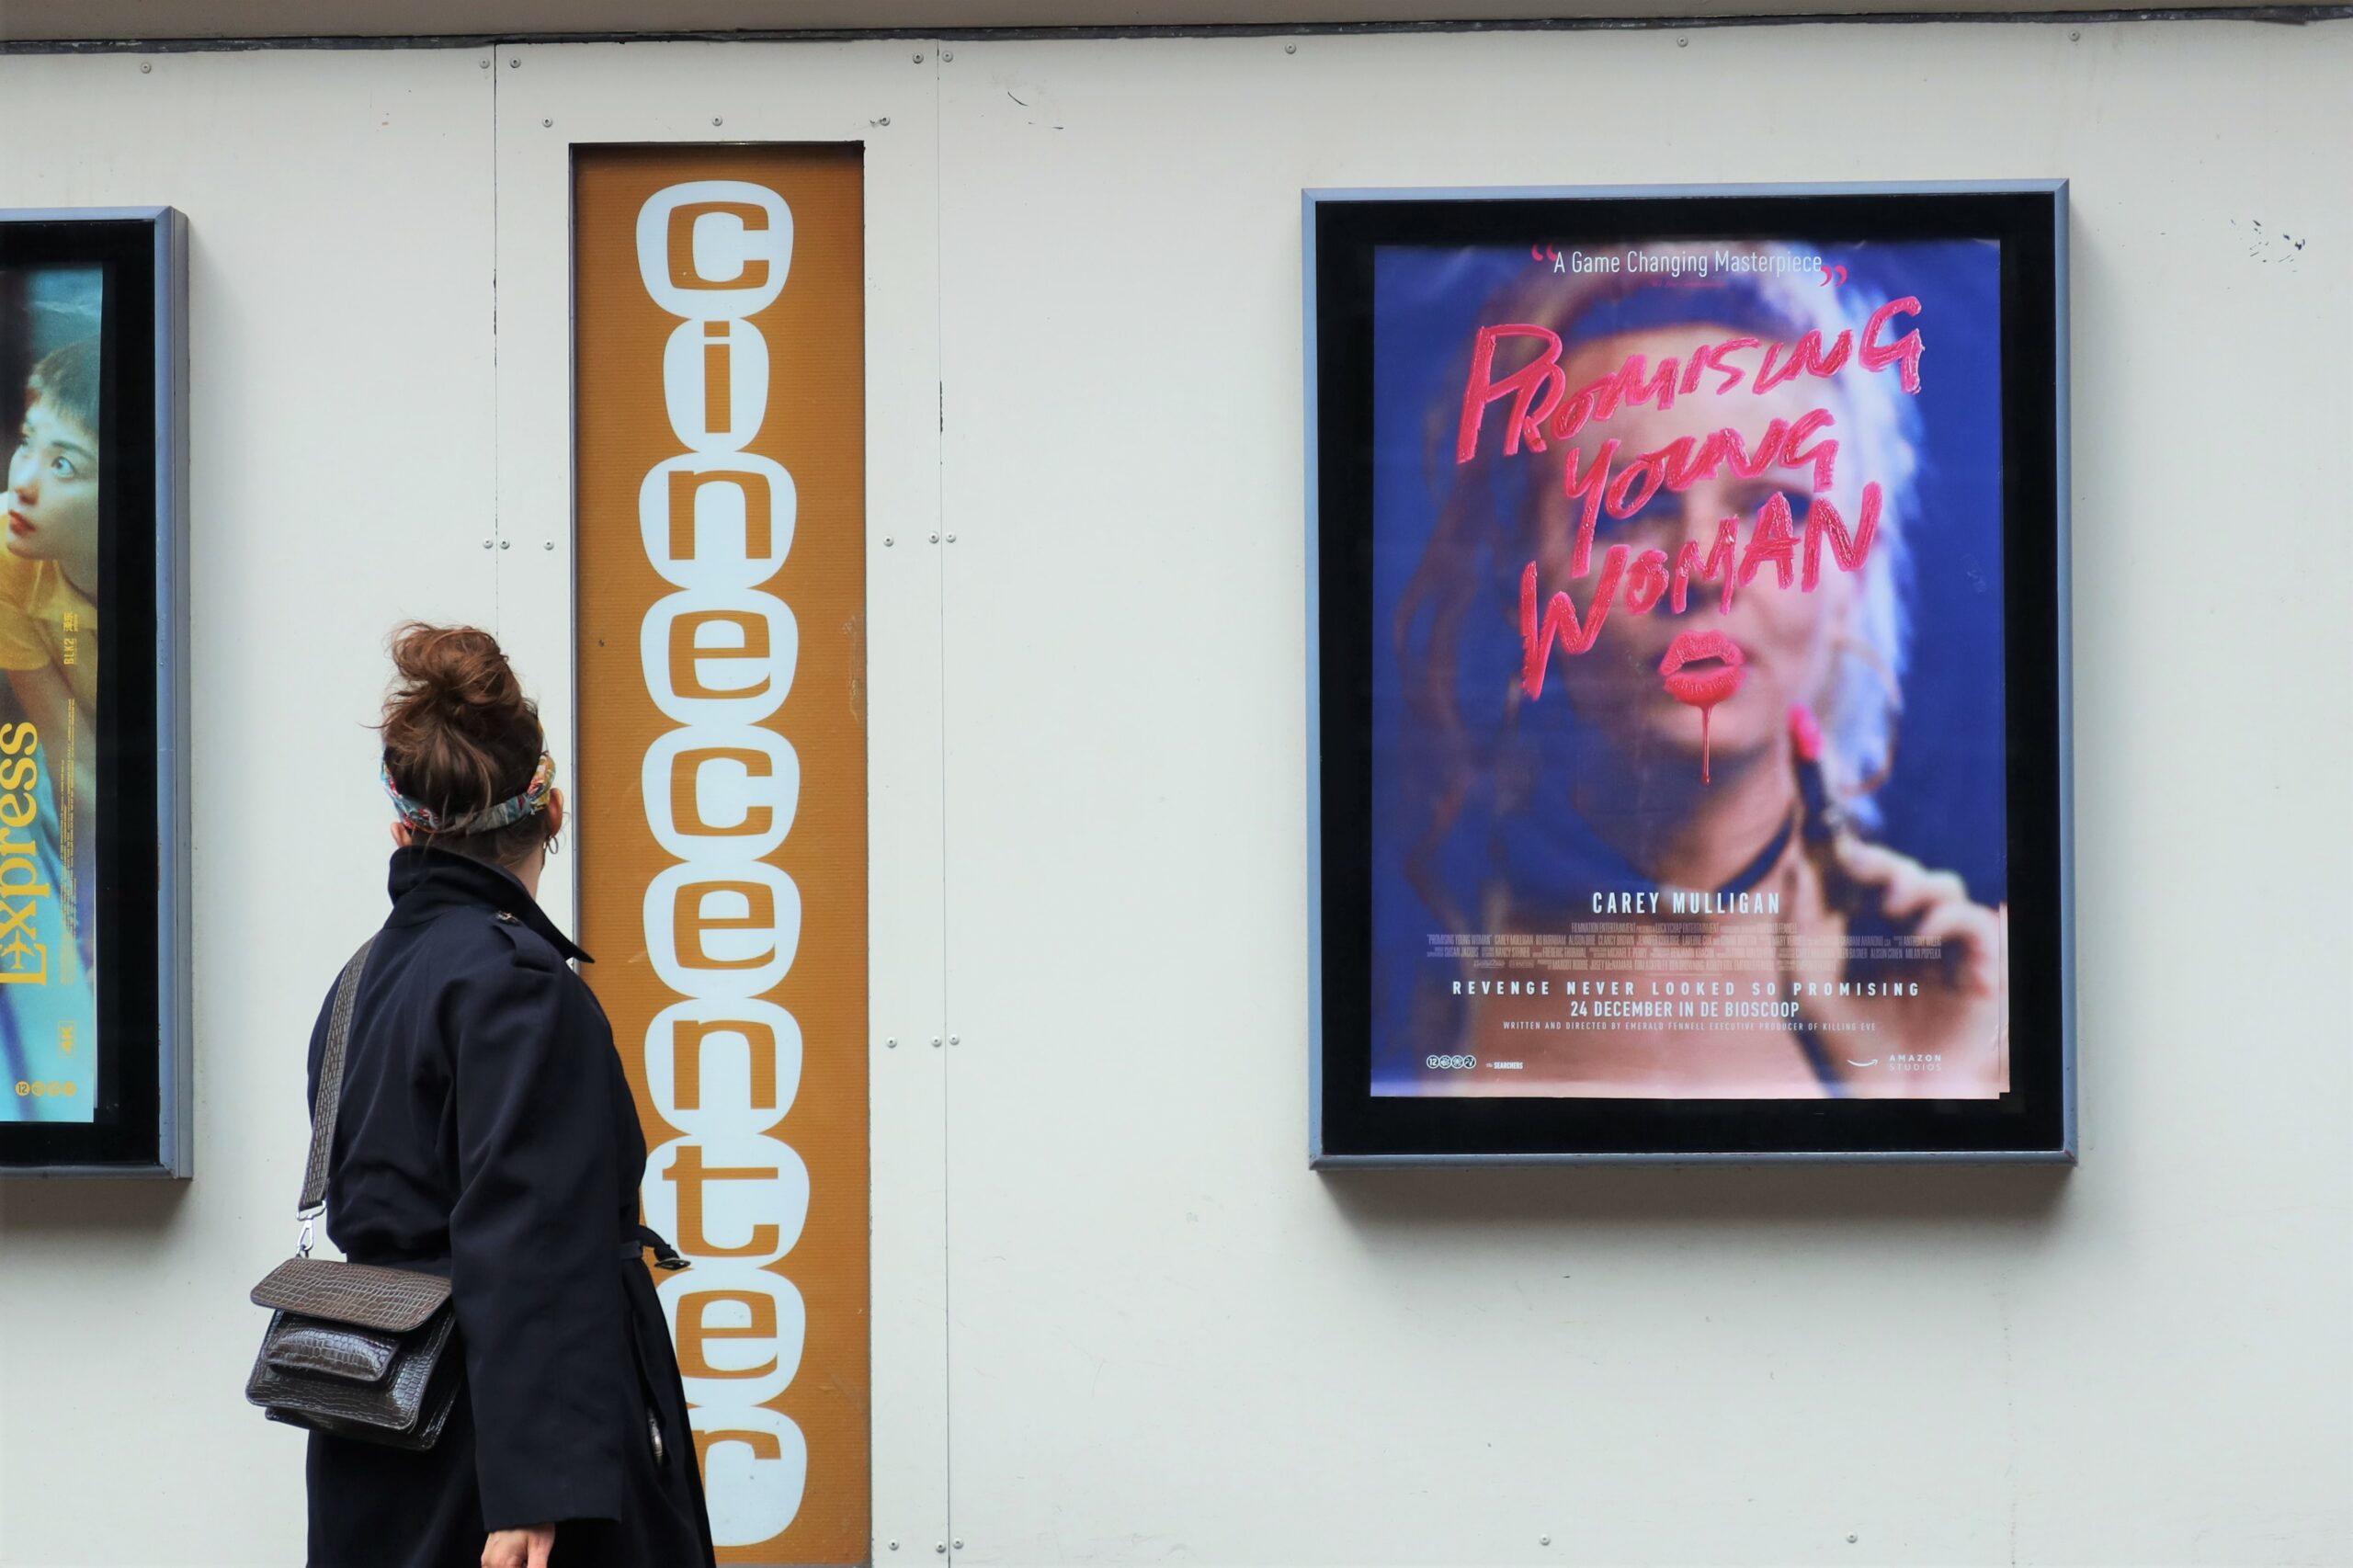 Promising Young Woman promotional material at cinema